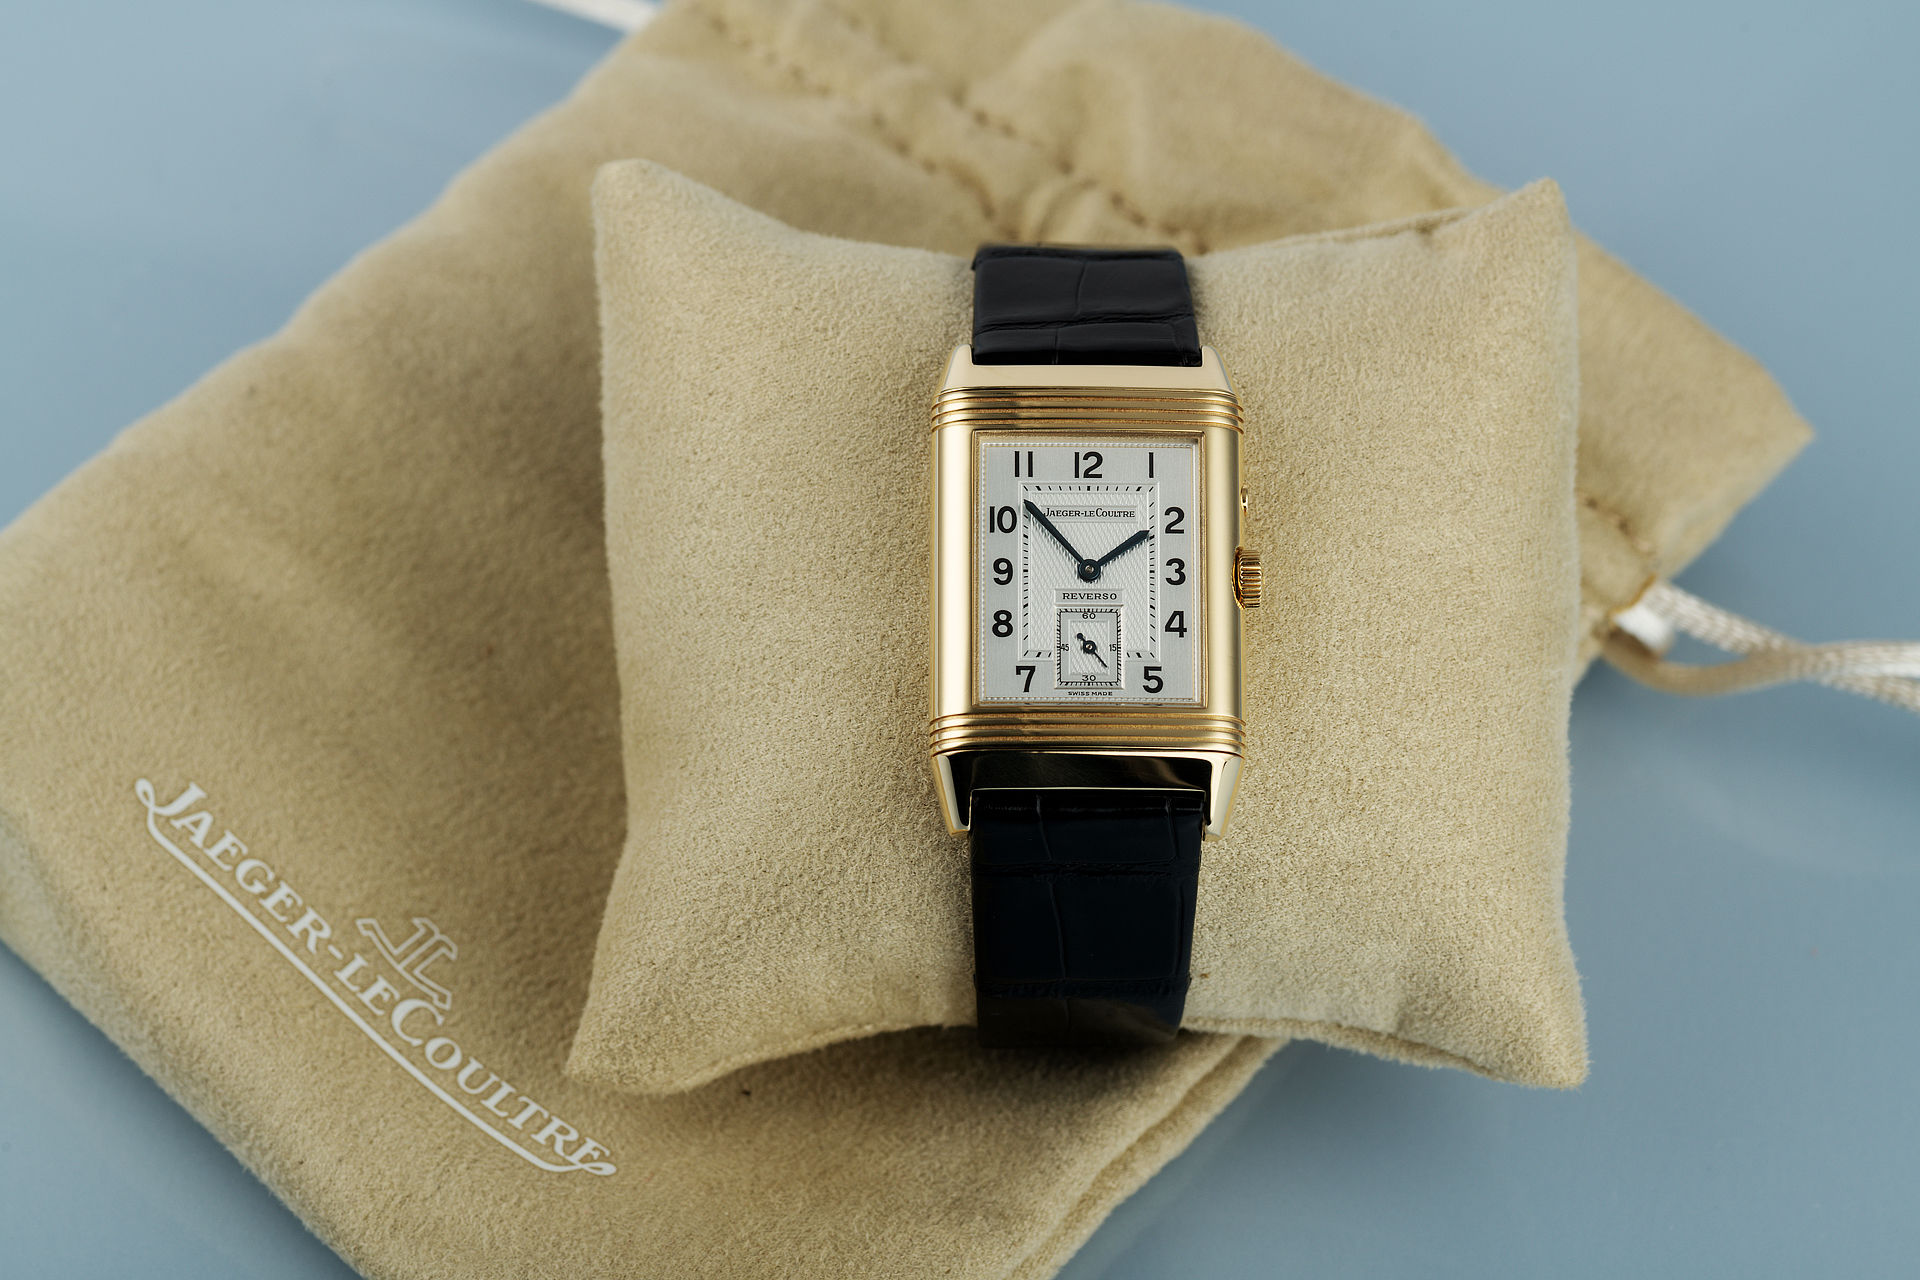 Yellow Gold "Night & Day" | ref 270.1.54 | Jaeger-leCoultre Reverso Duo